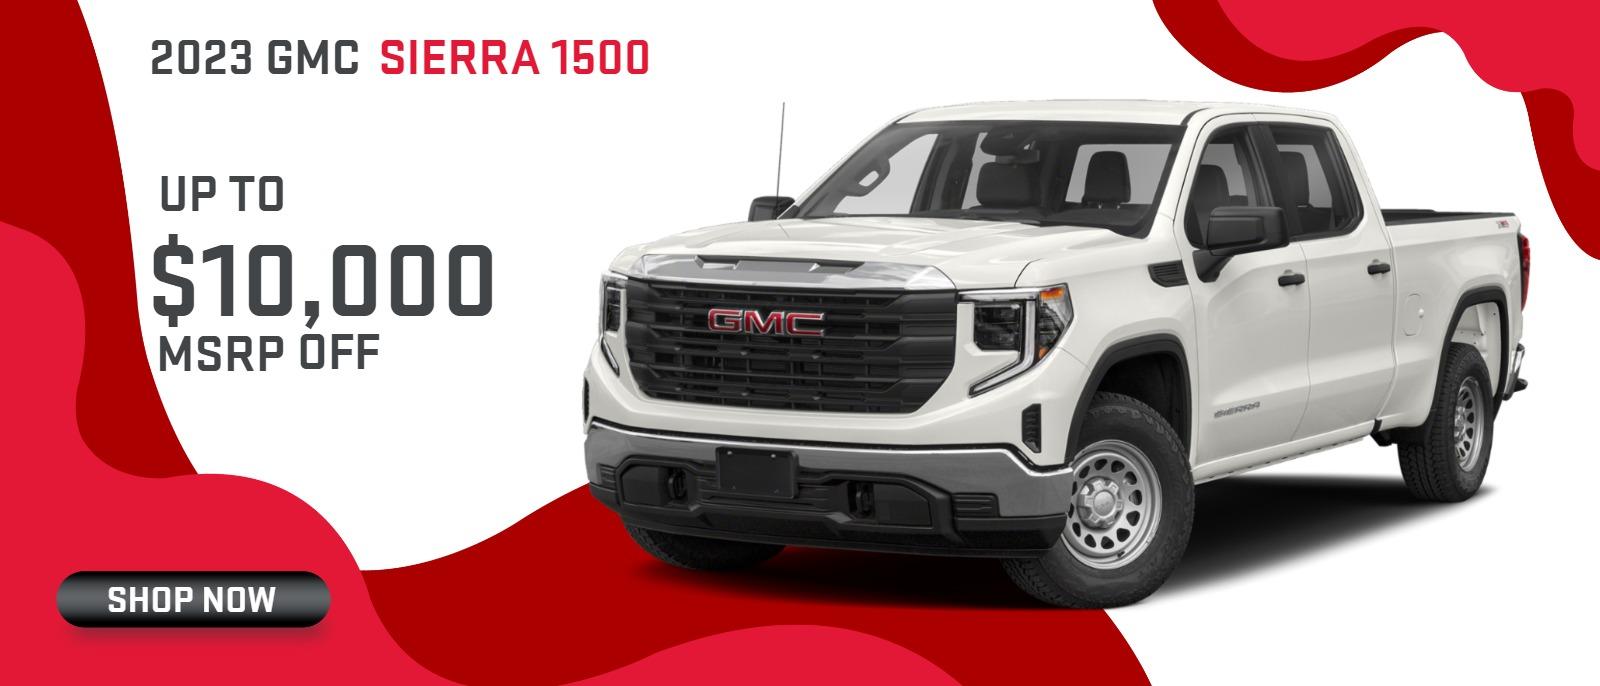 UP TO $10,000 OFF MSRP